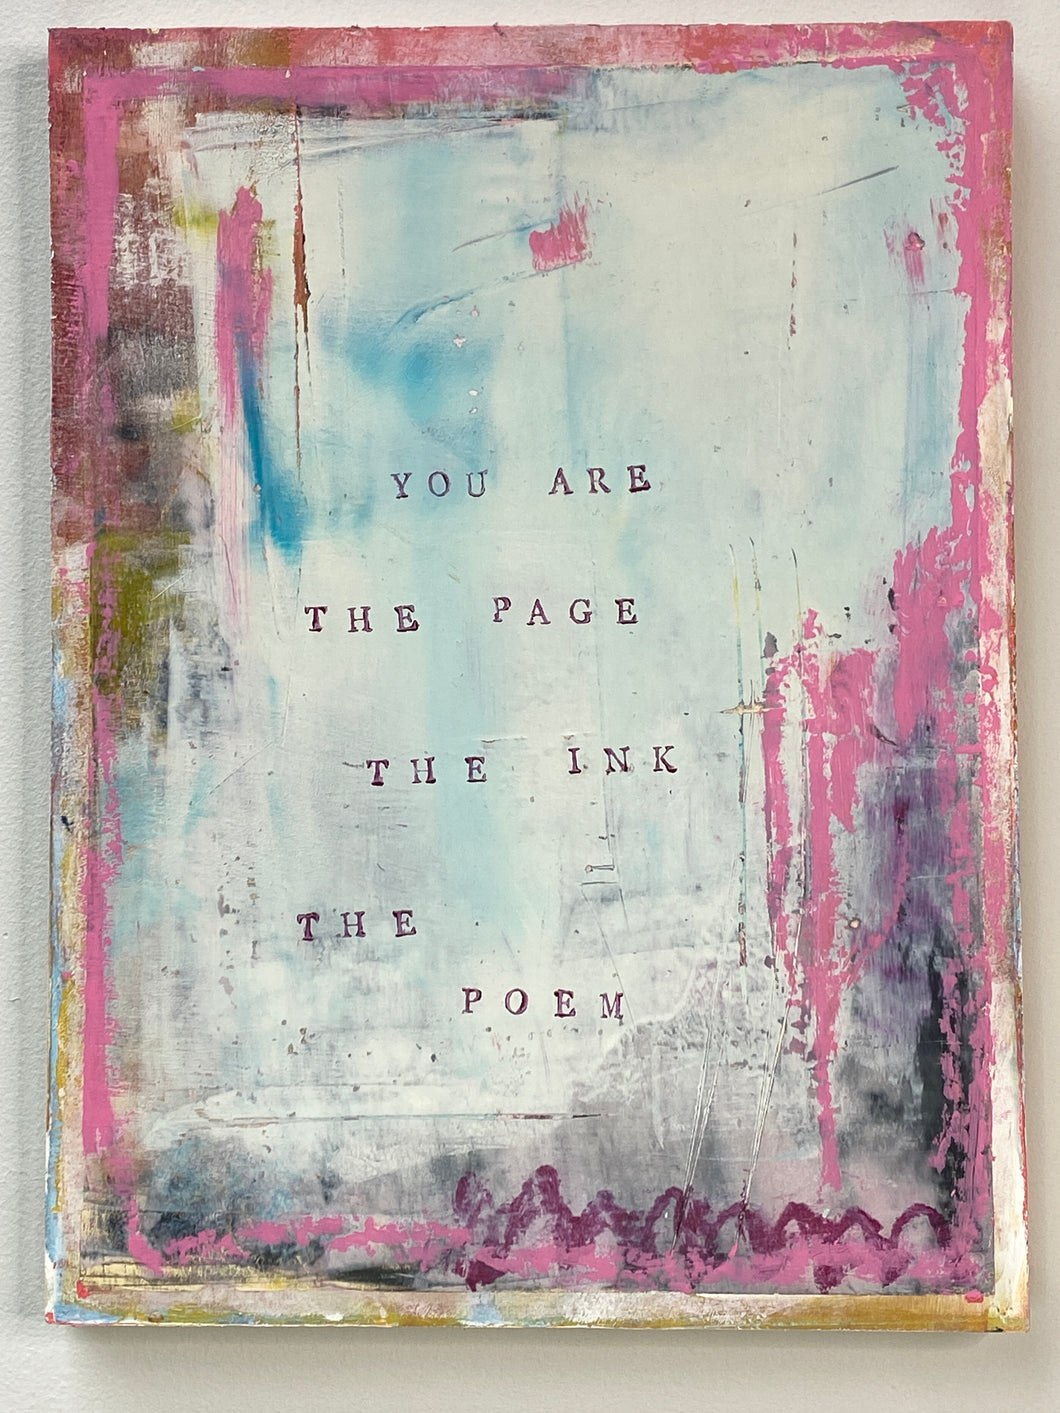 You are the page, the ink, the poem